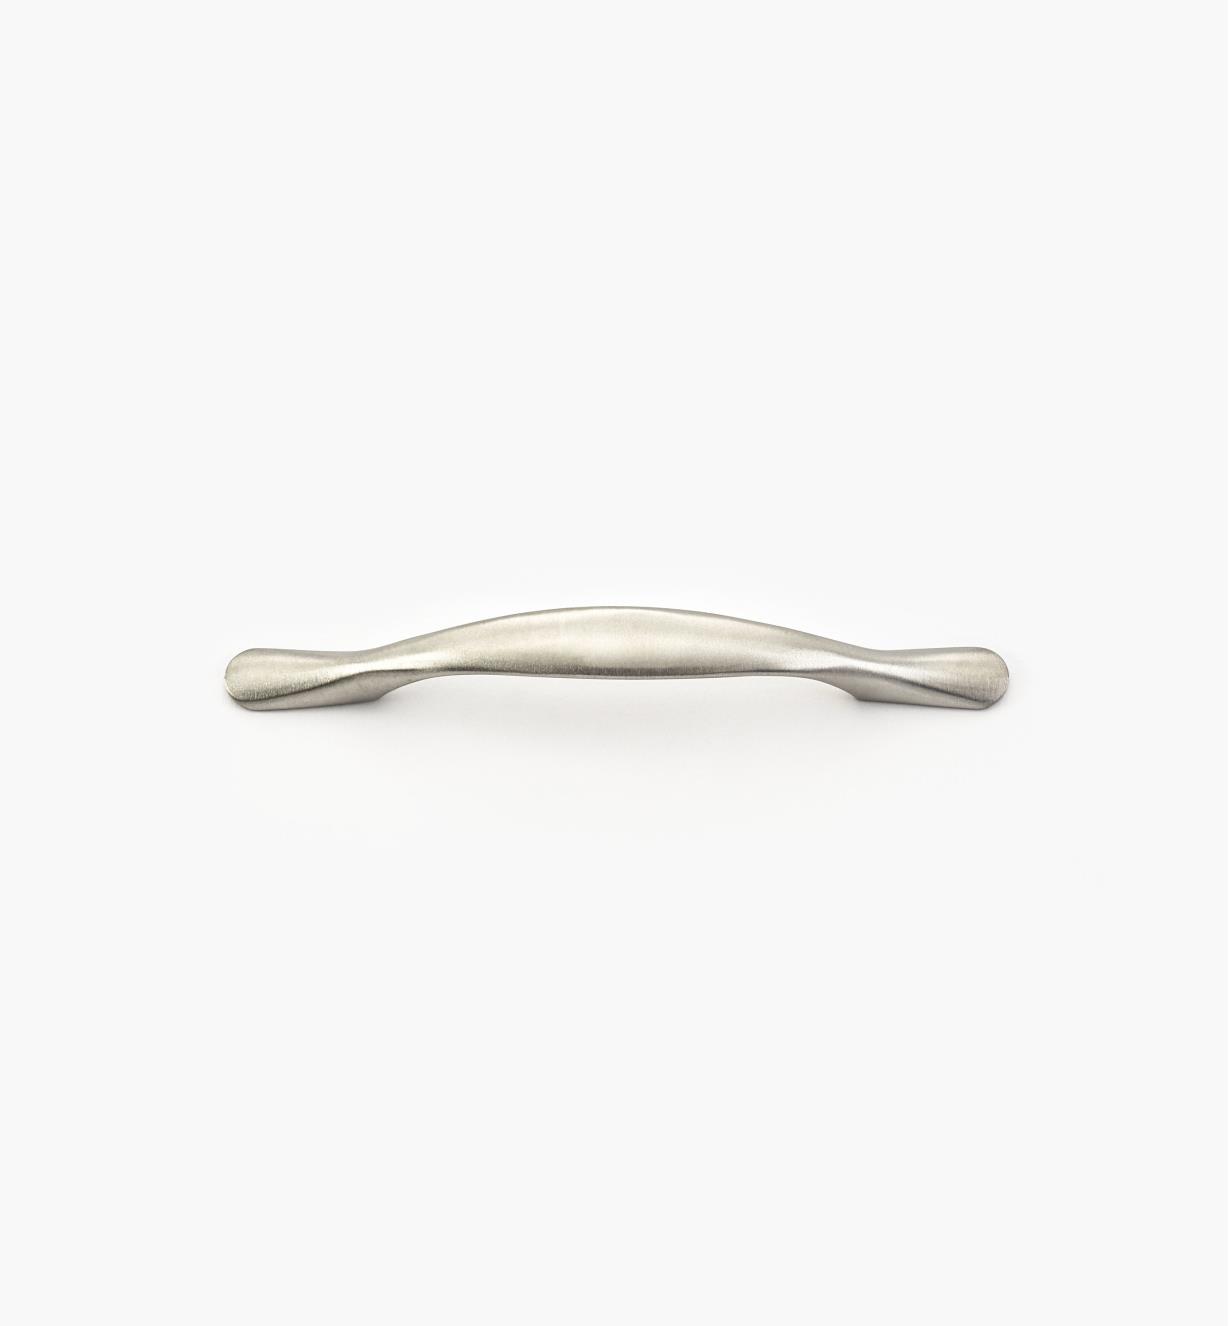 01W8571 - 96mm Stainless Steel Wavy Bow Handle